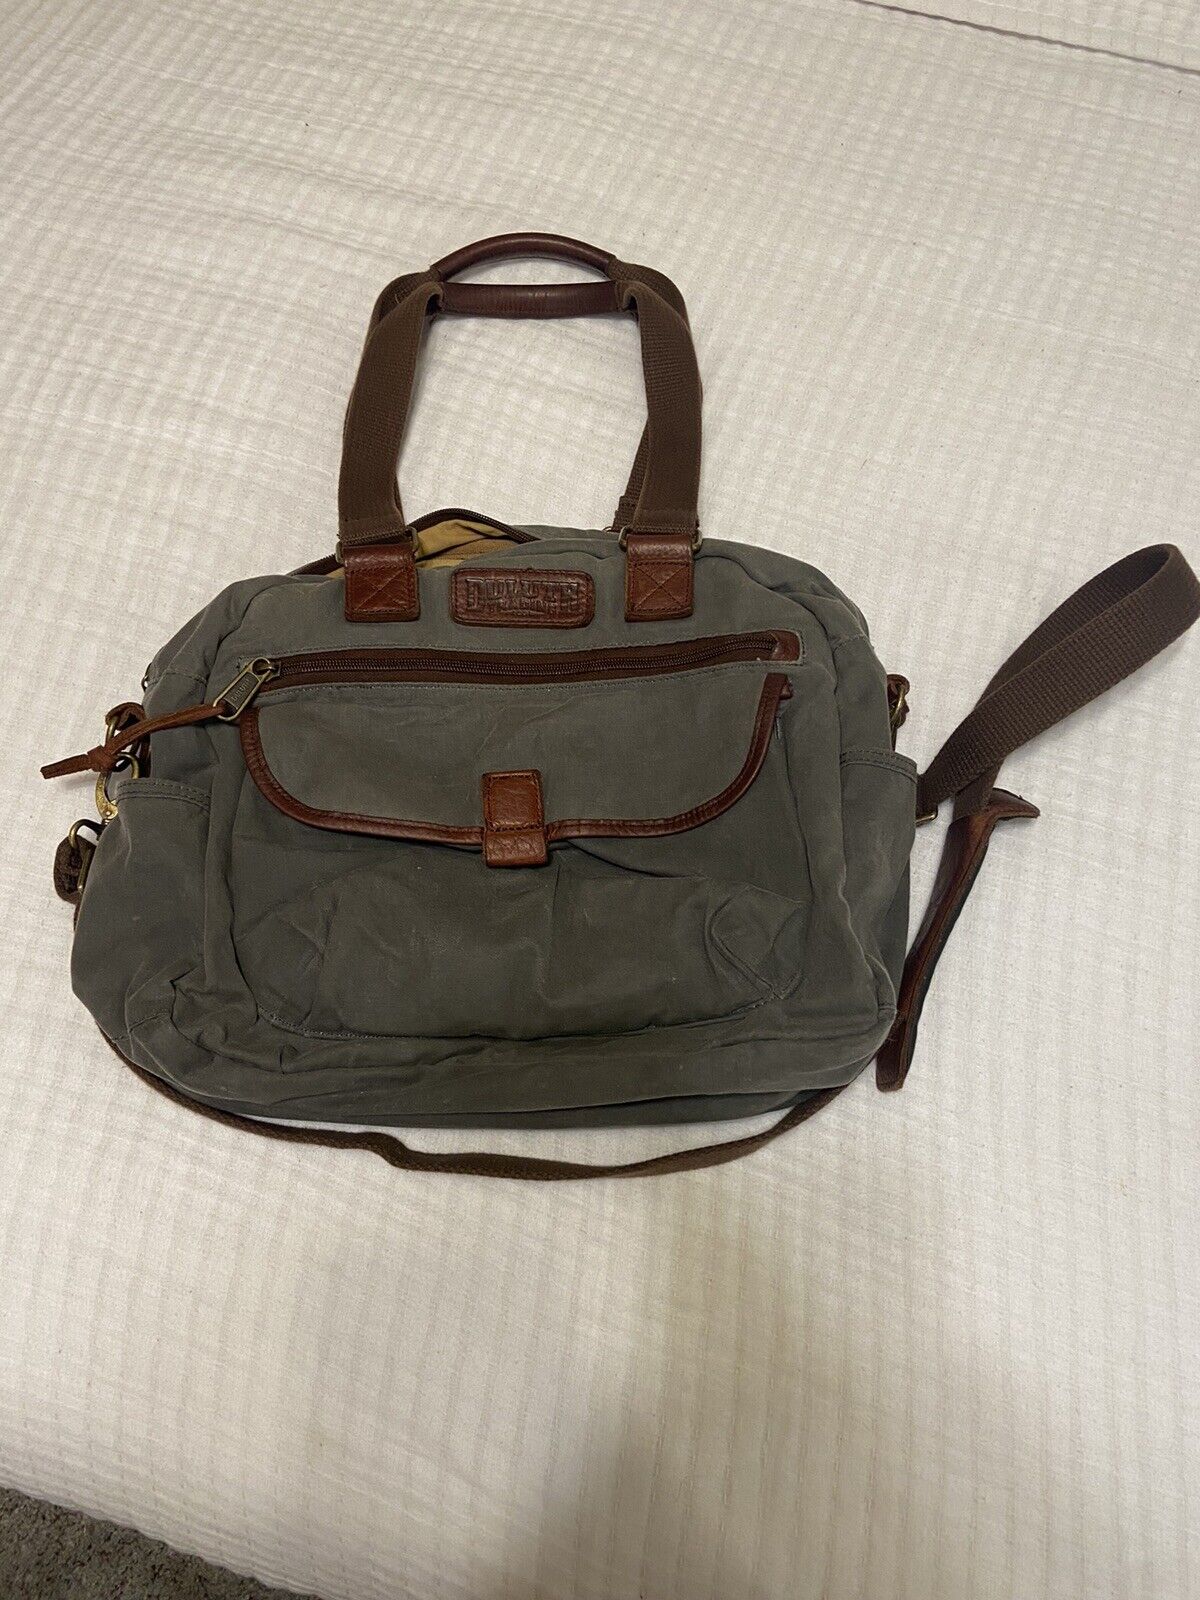 Duluth Trading Co. Crossbody Utility Laptop Bag. Green Canvas.